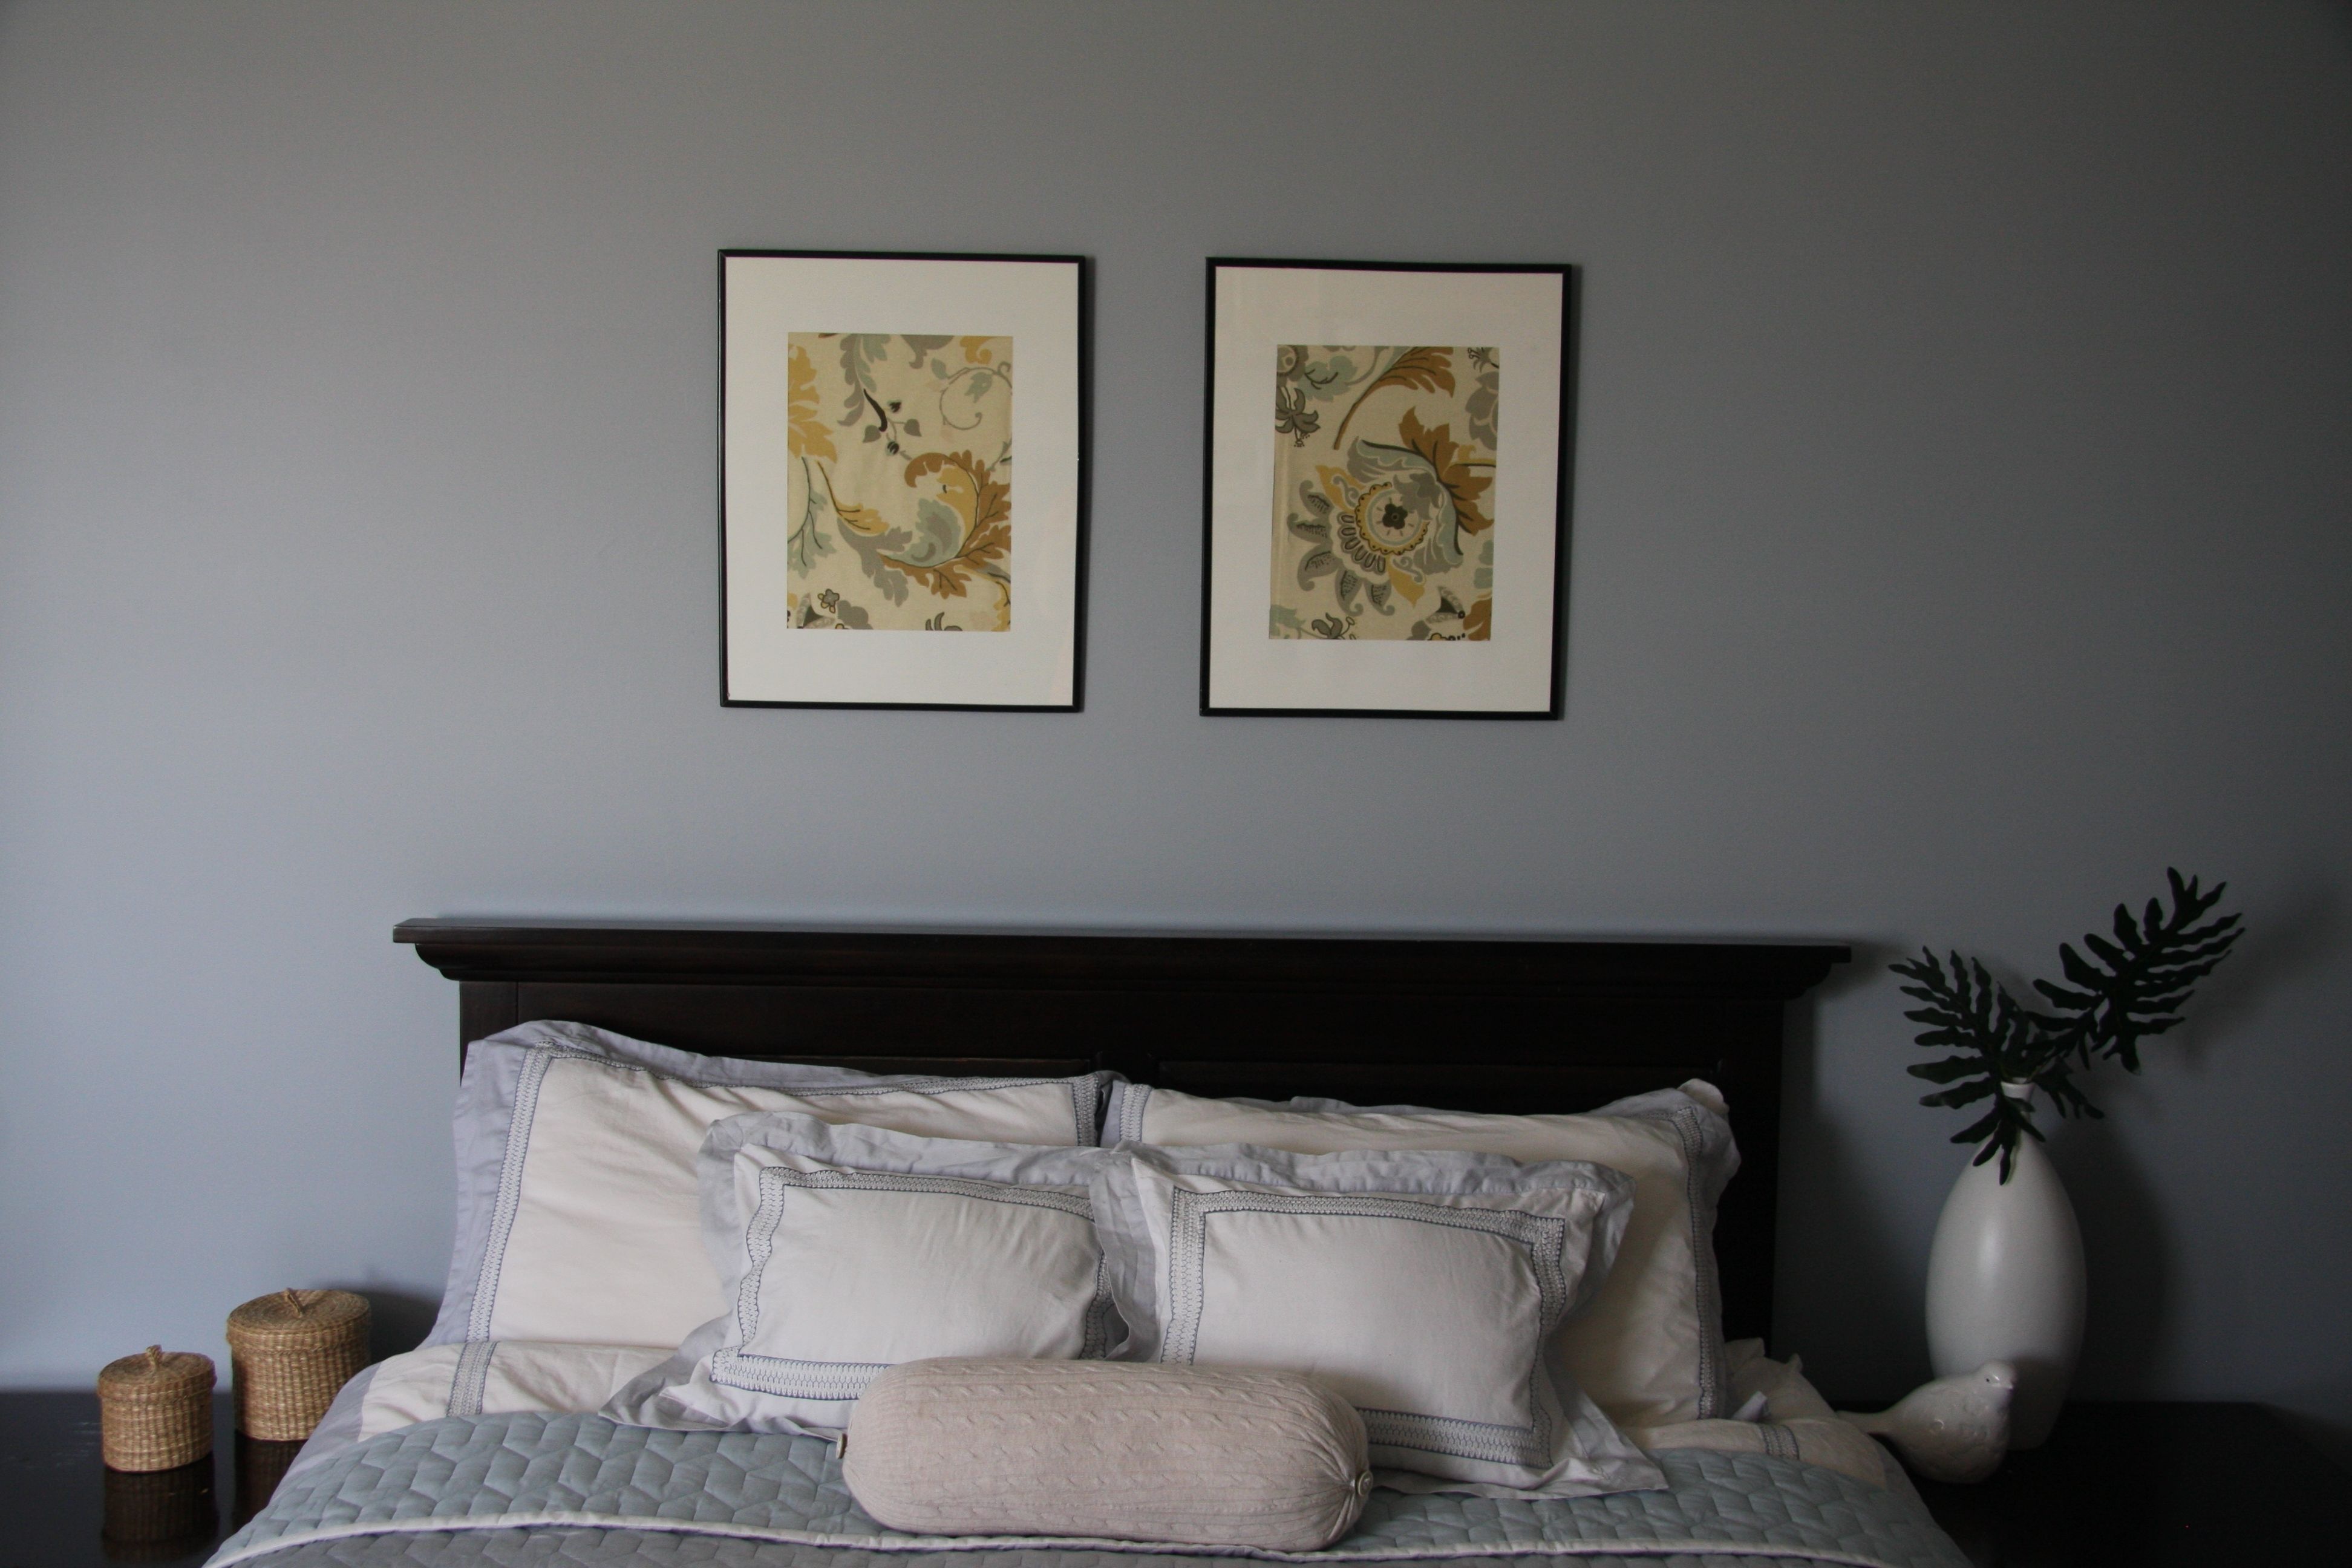 Favorite Bedroom: Bedroom With Gray Palette And Double Framed Floral In Bedroom Framed Wall Art (View 5 of 15)